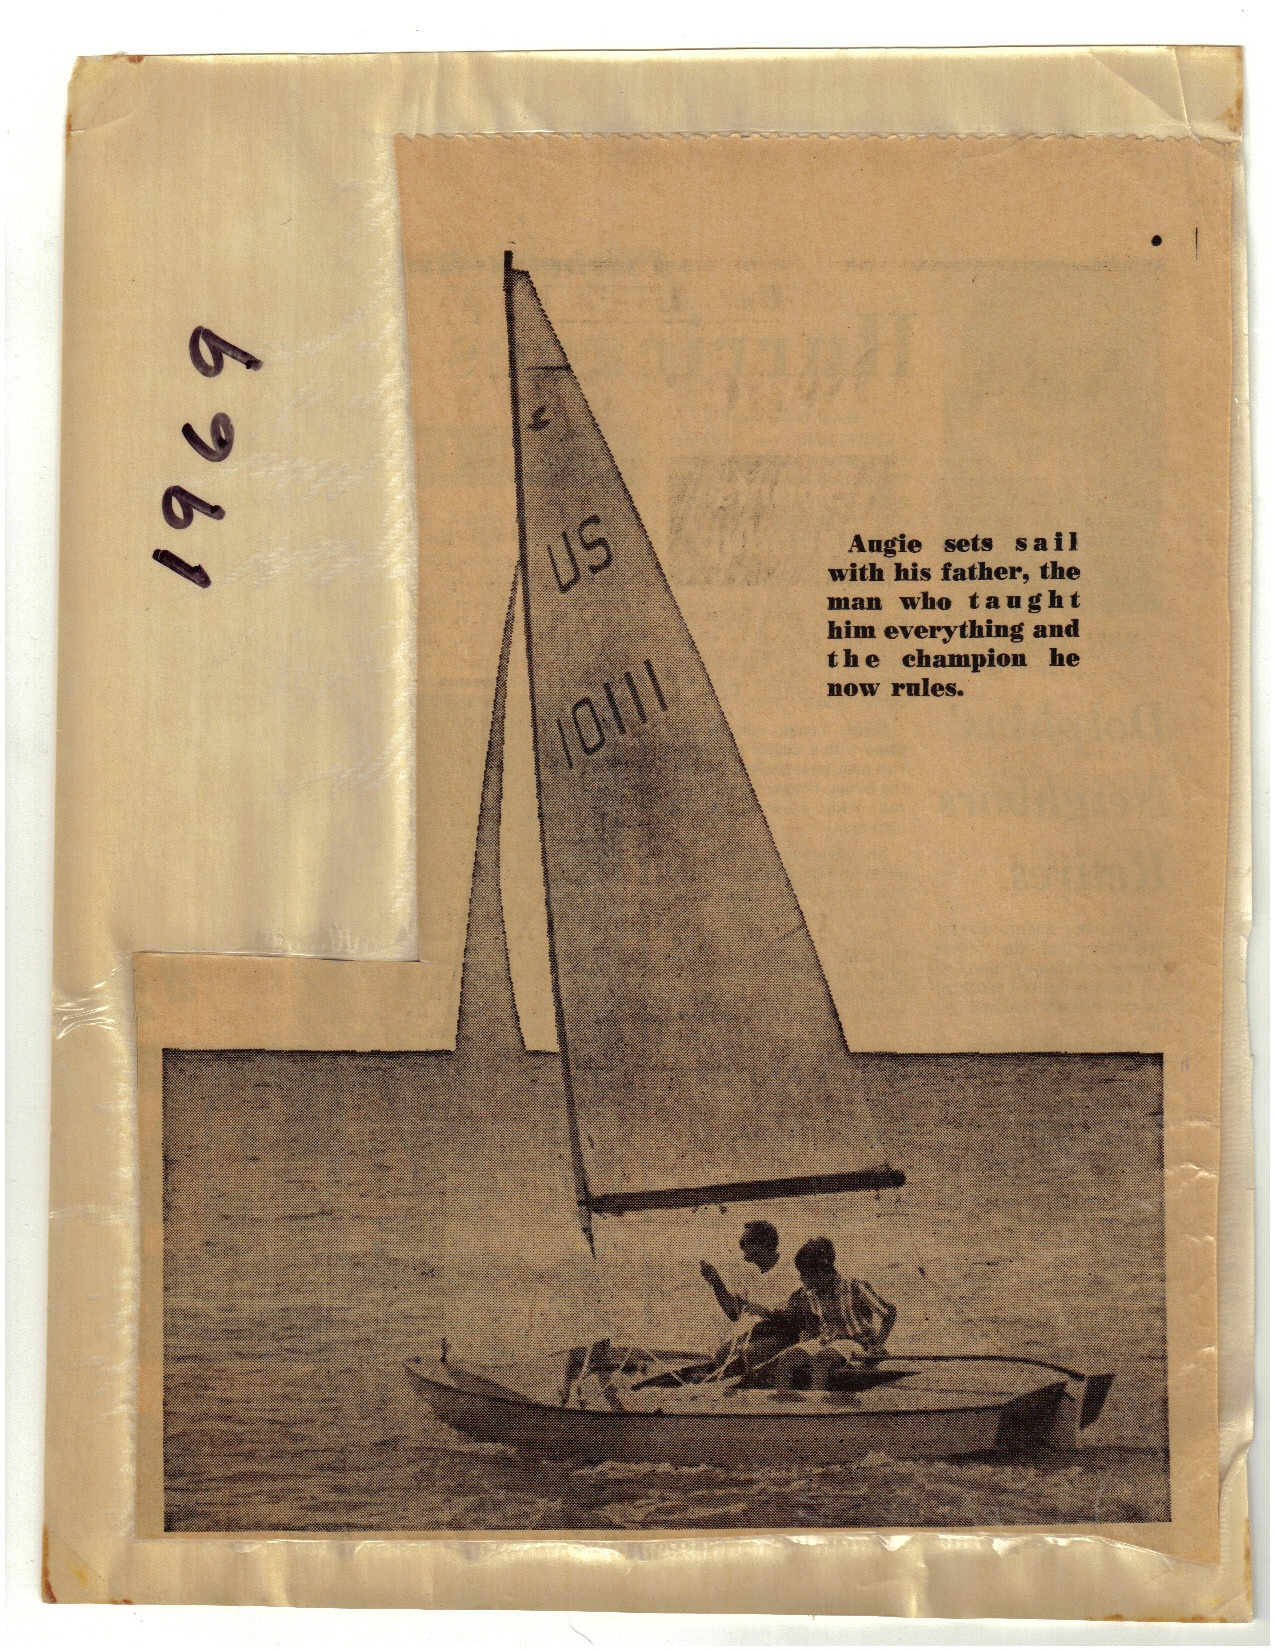 This is the only photo that I have of Augie and I sailing together on a Snipe.  The Jupiter is sailing with the round wood mast that came with the boat from Cuba.  I know because it has no spreaders.  I see that the boat has already got some upgrading, li